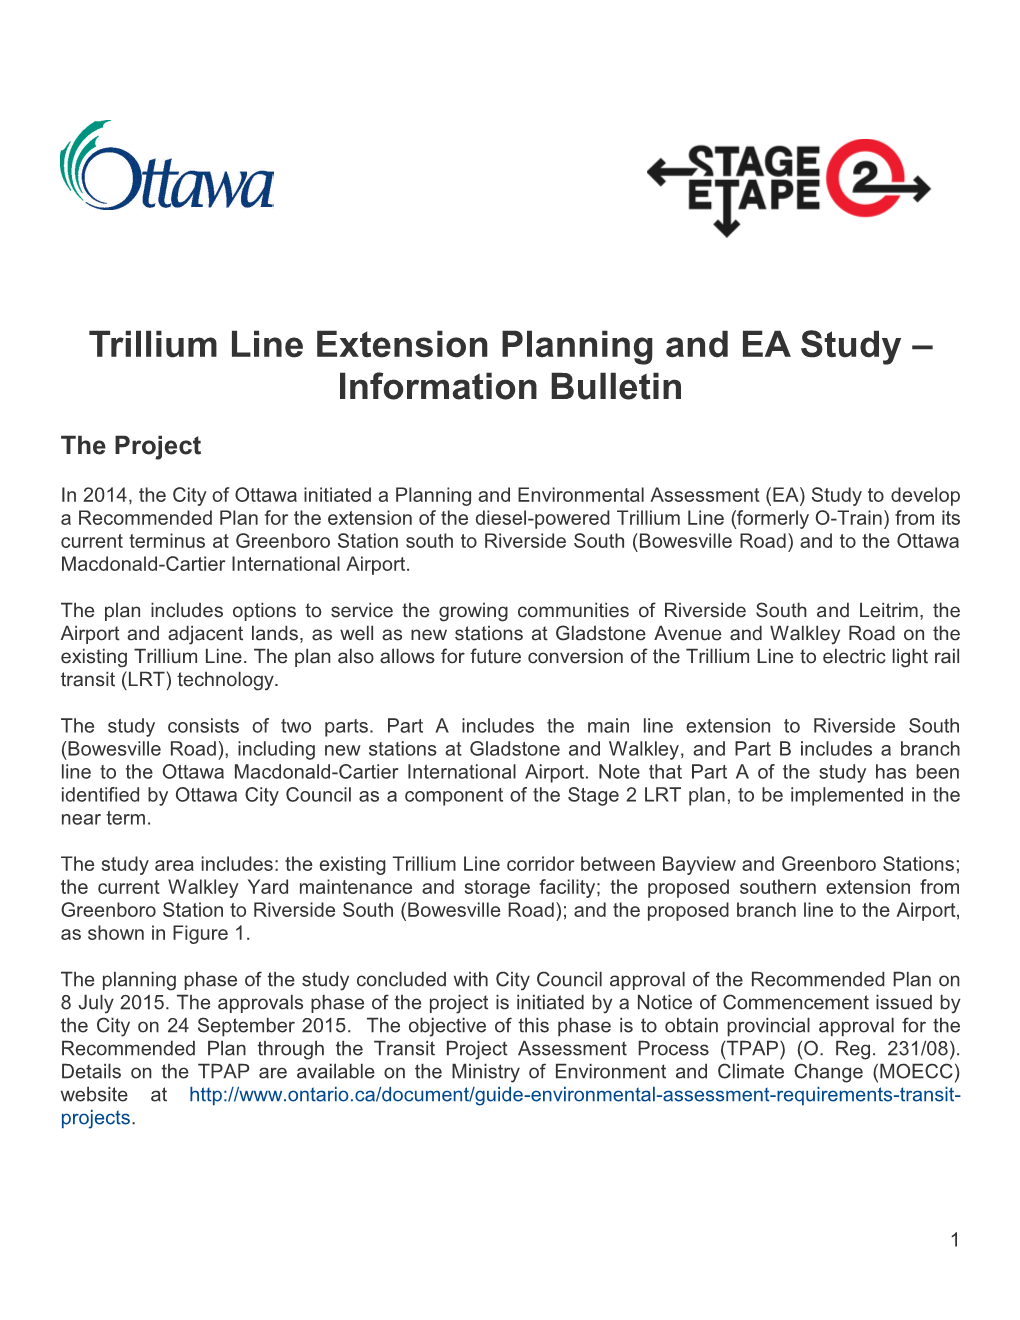 Trillium Line Extension Planning and EA Study – Information Bulletin